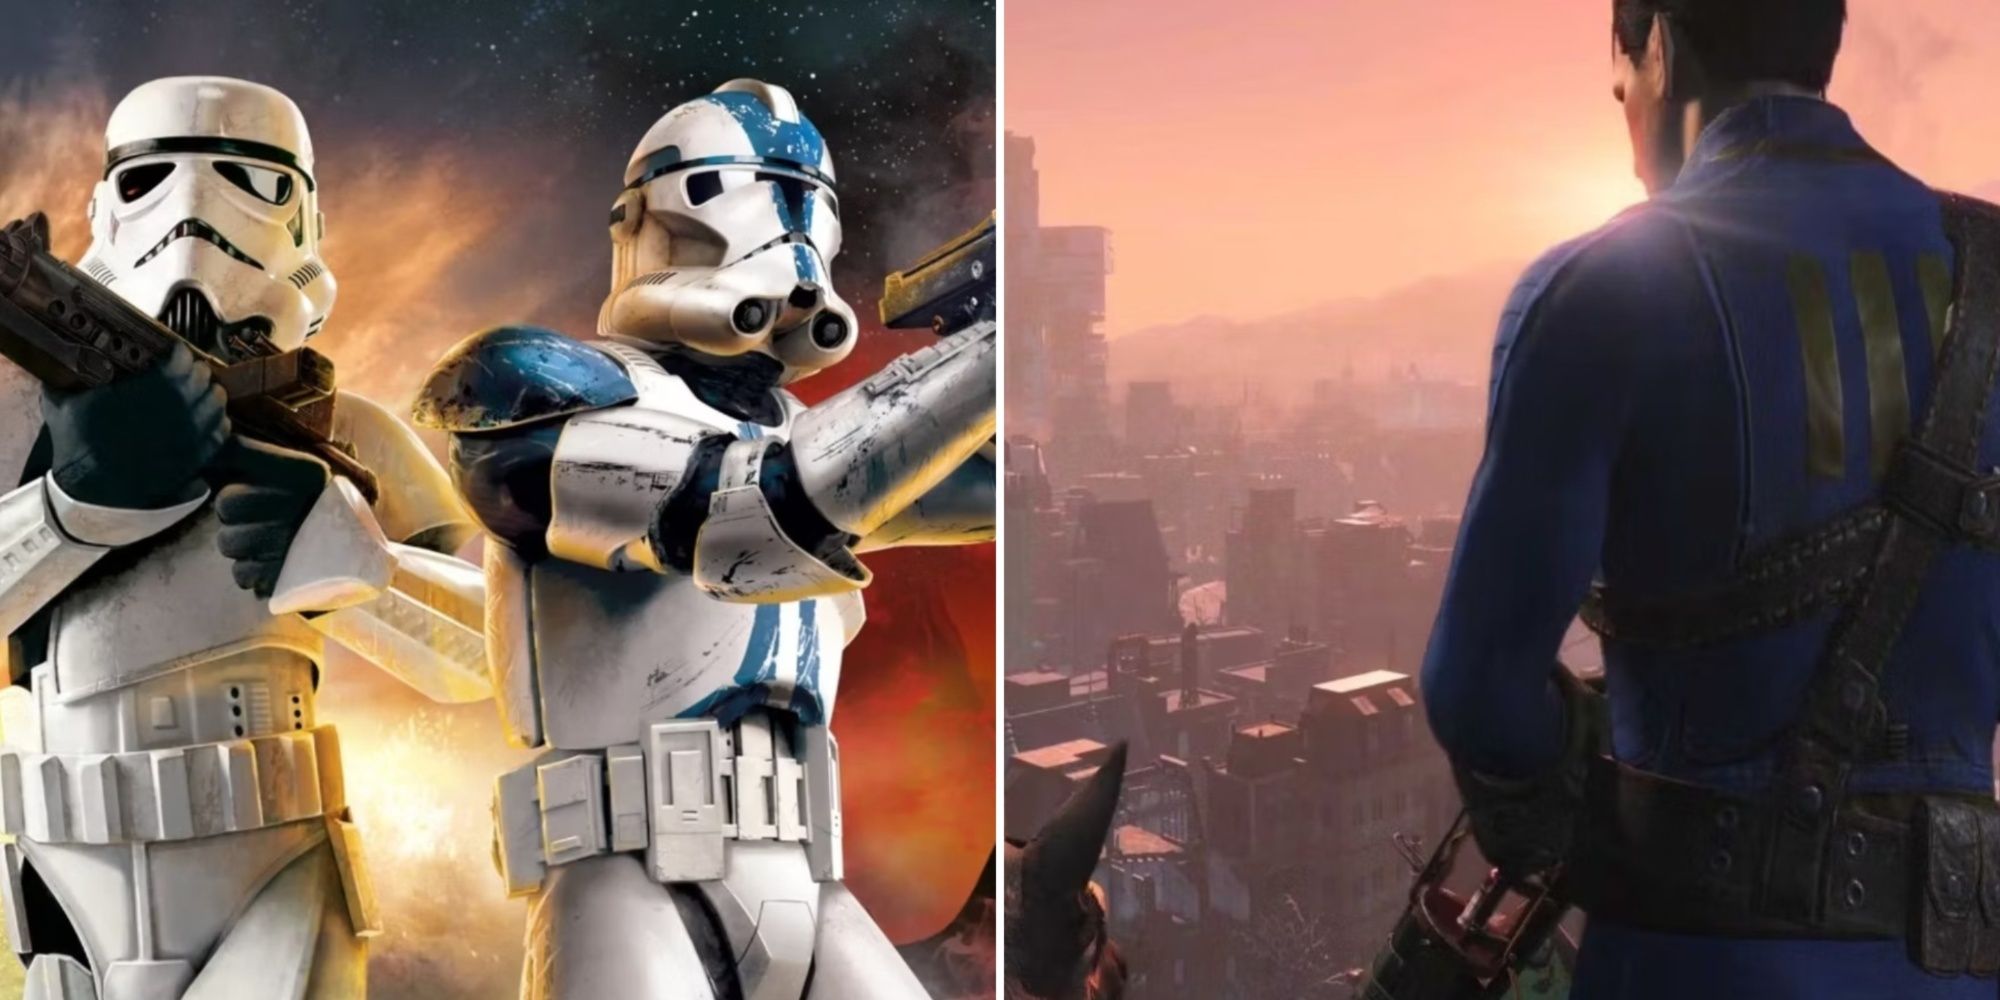 Star Wars Battlefront Classic Collection cover and Fallout 4 VR image split side by side